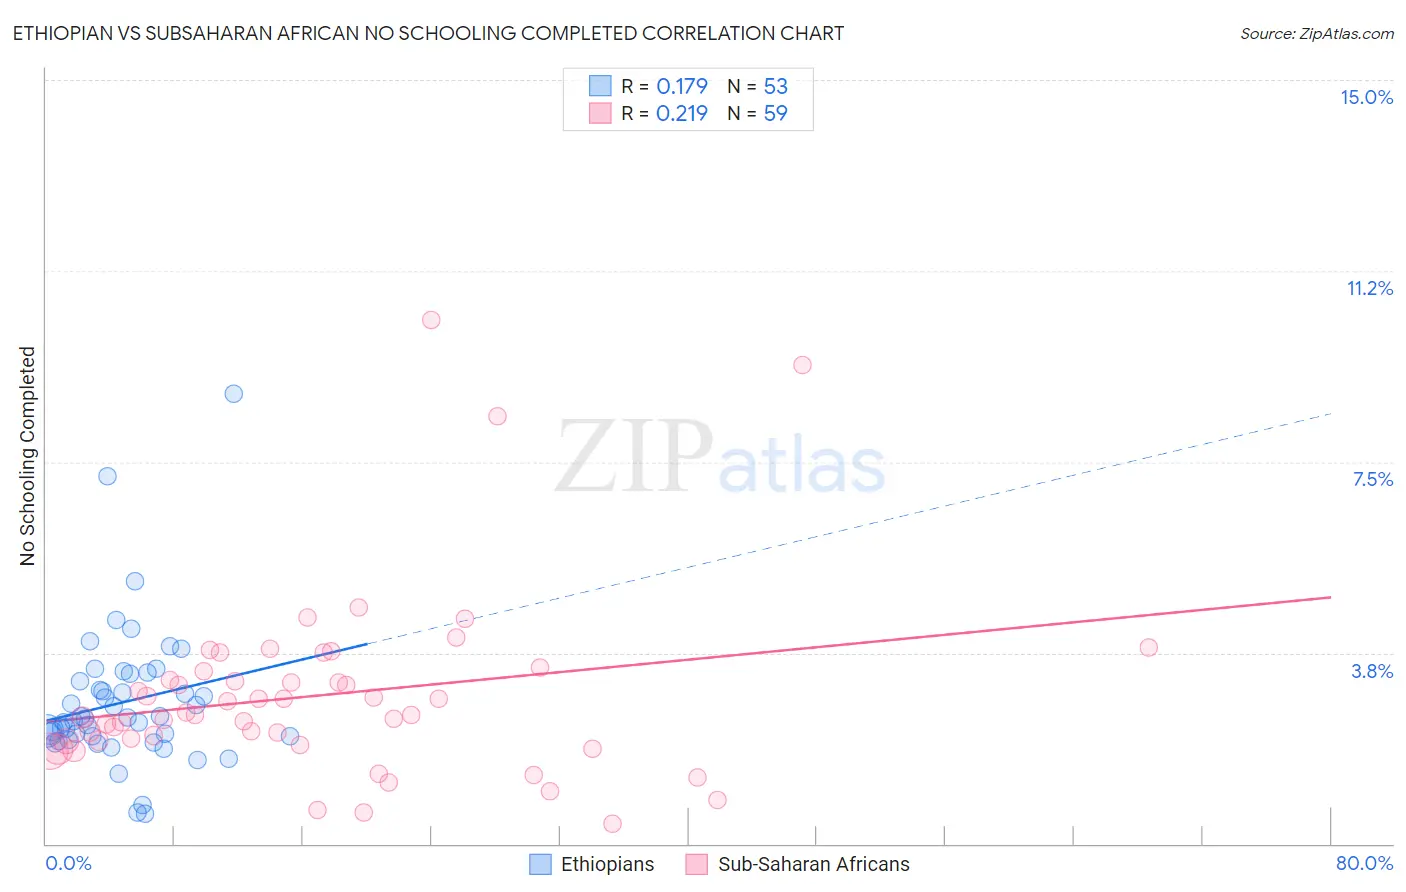 Ethiopian vs Subsaharan African No Schooling Completed